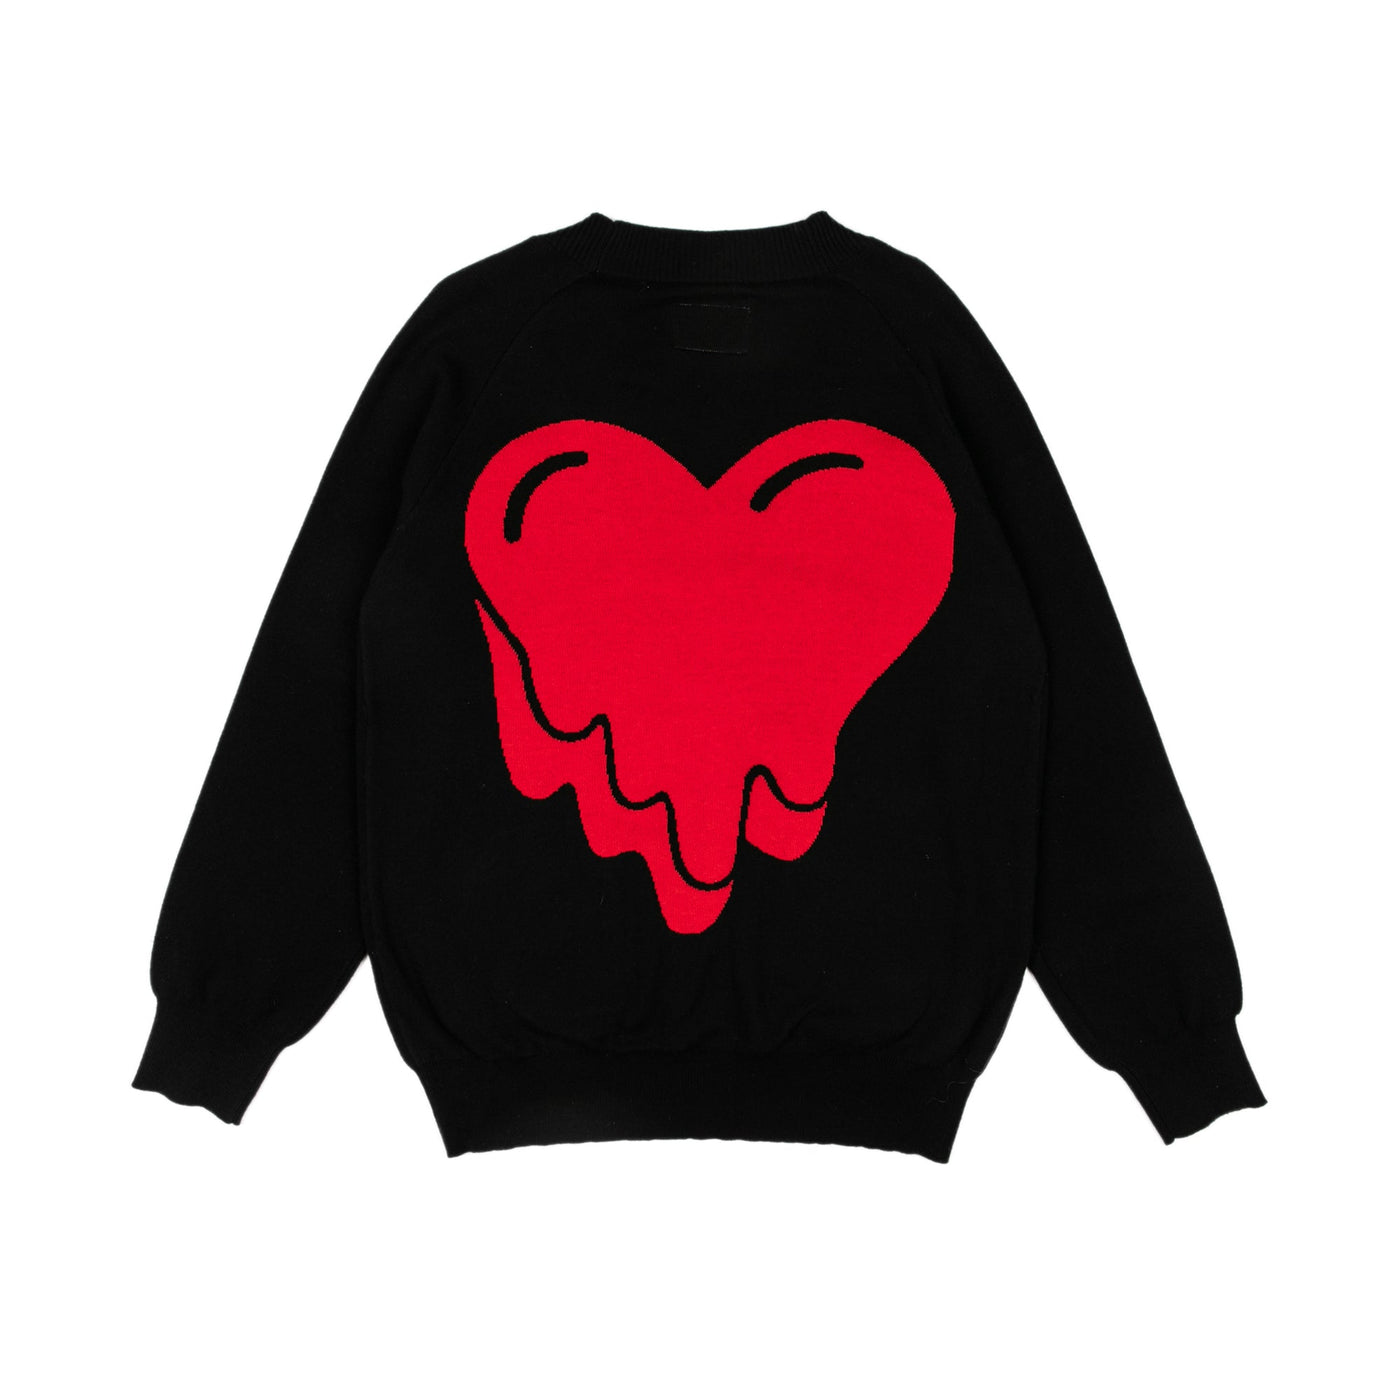 EU HEART CARDIGAN - Why are you here?